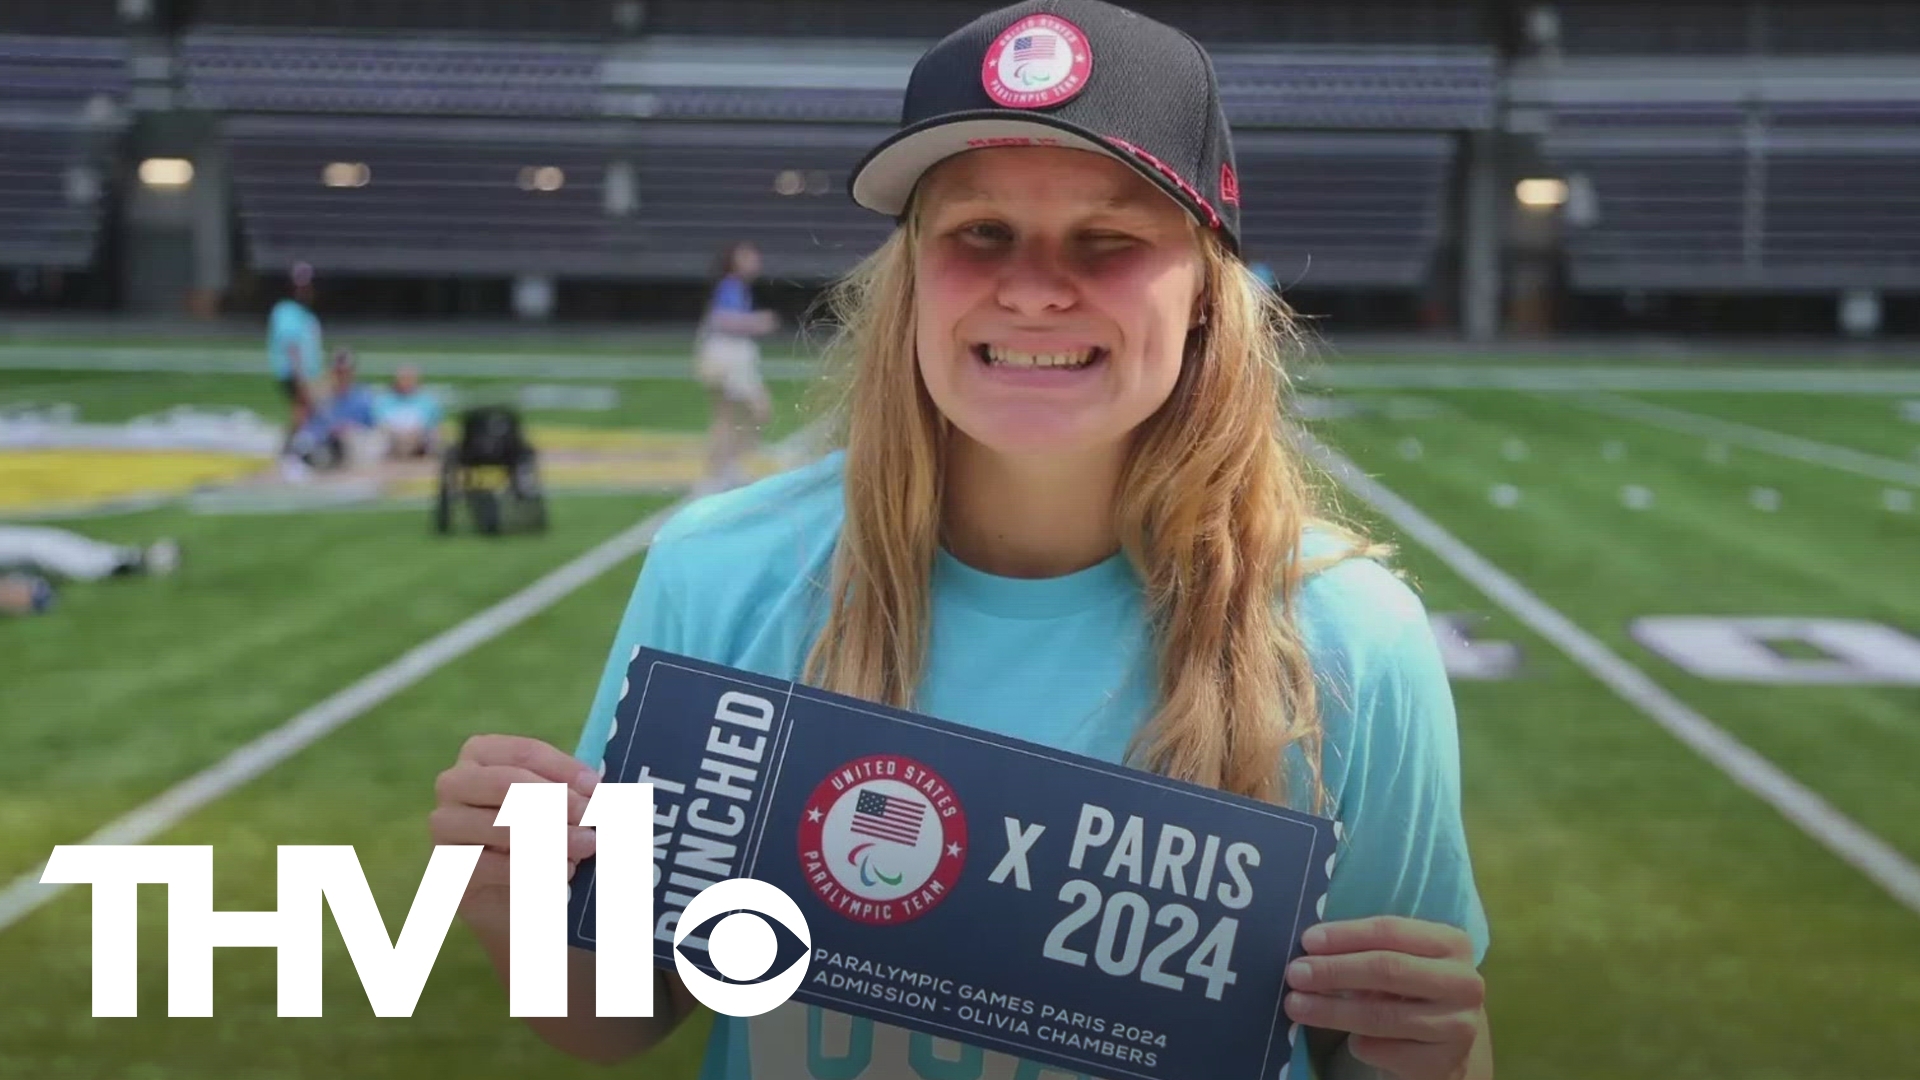 Little Rock, Arkansas native Olivia Chambers is heading to Paris, France for the 2024 Paralympic Games.